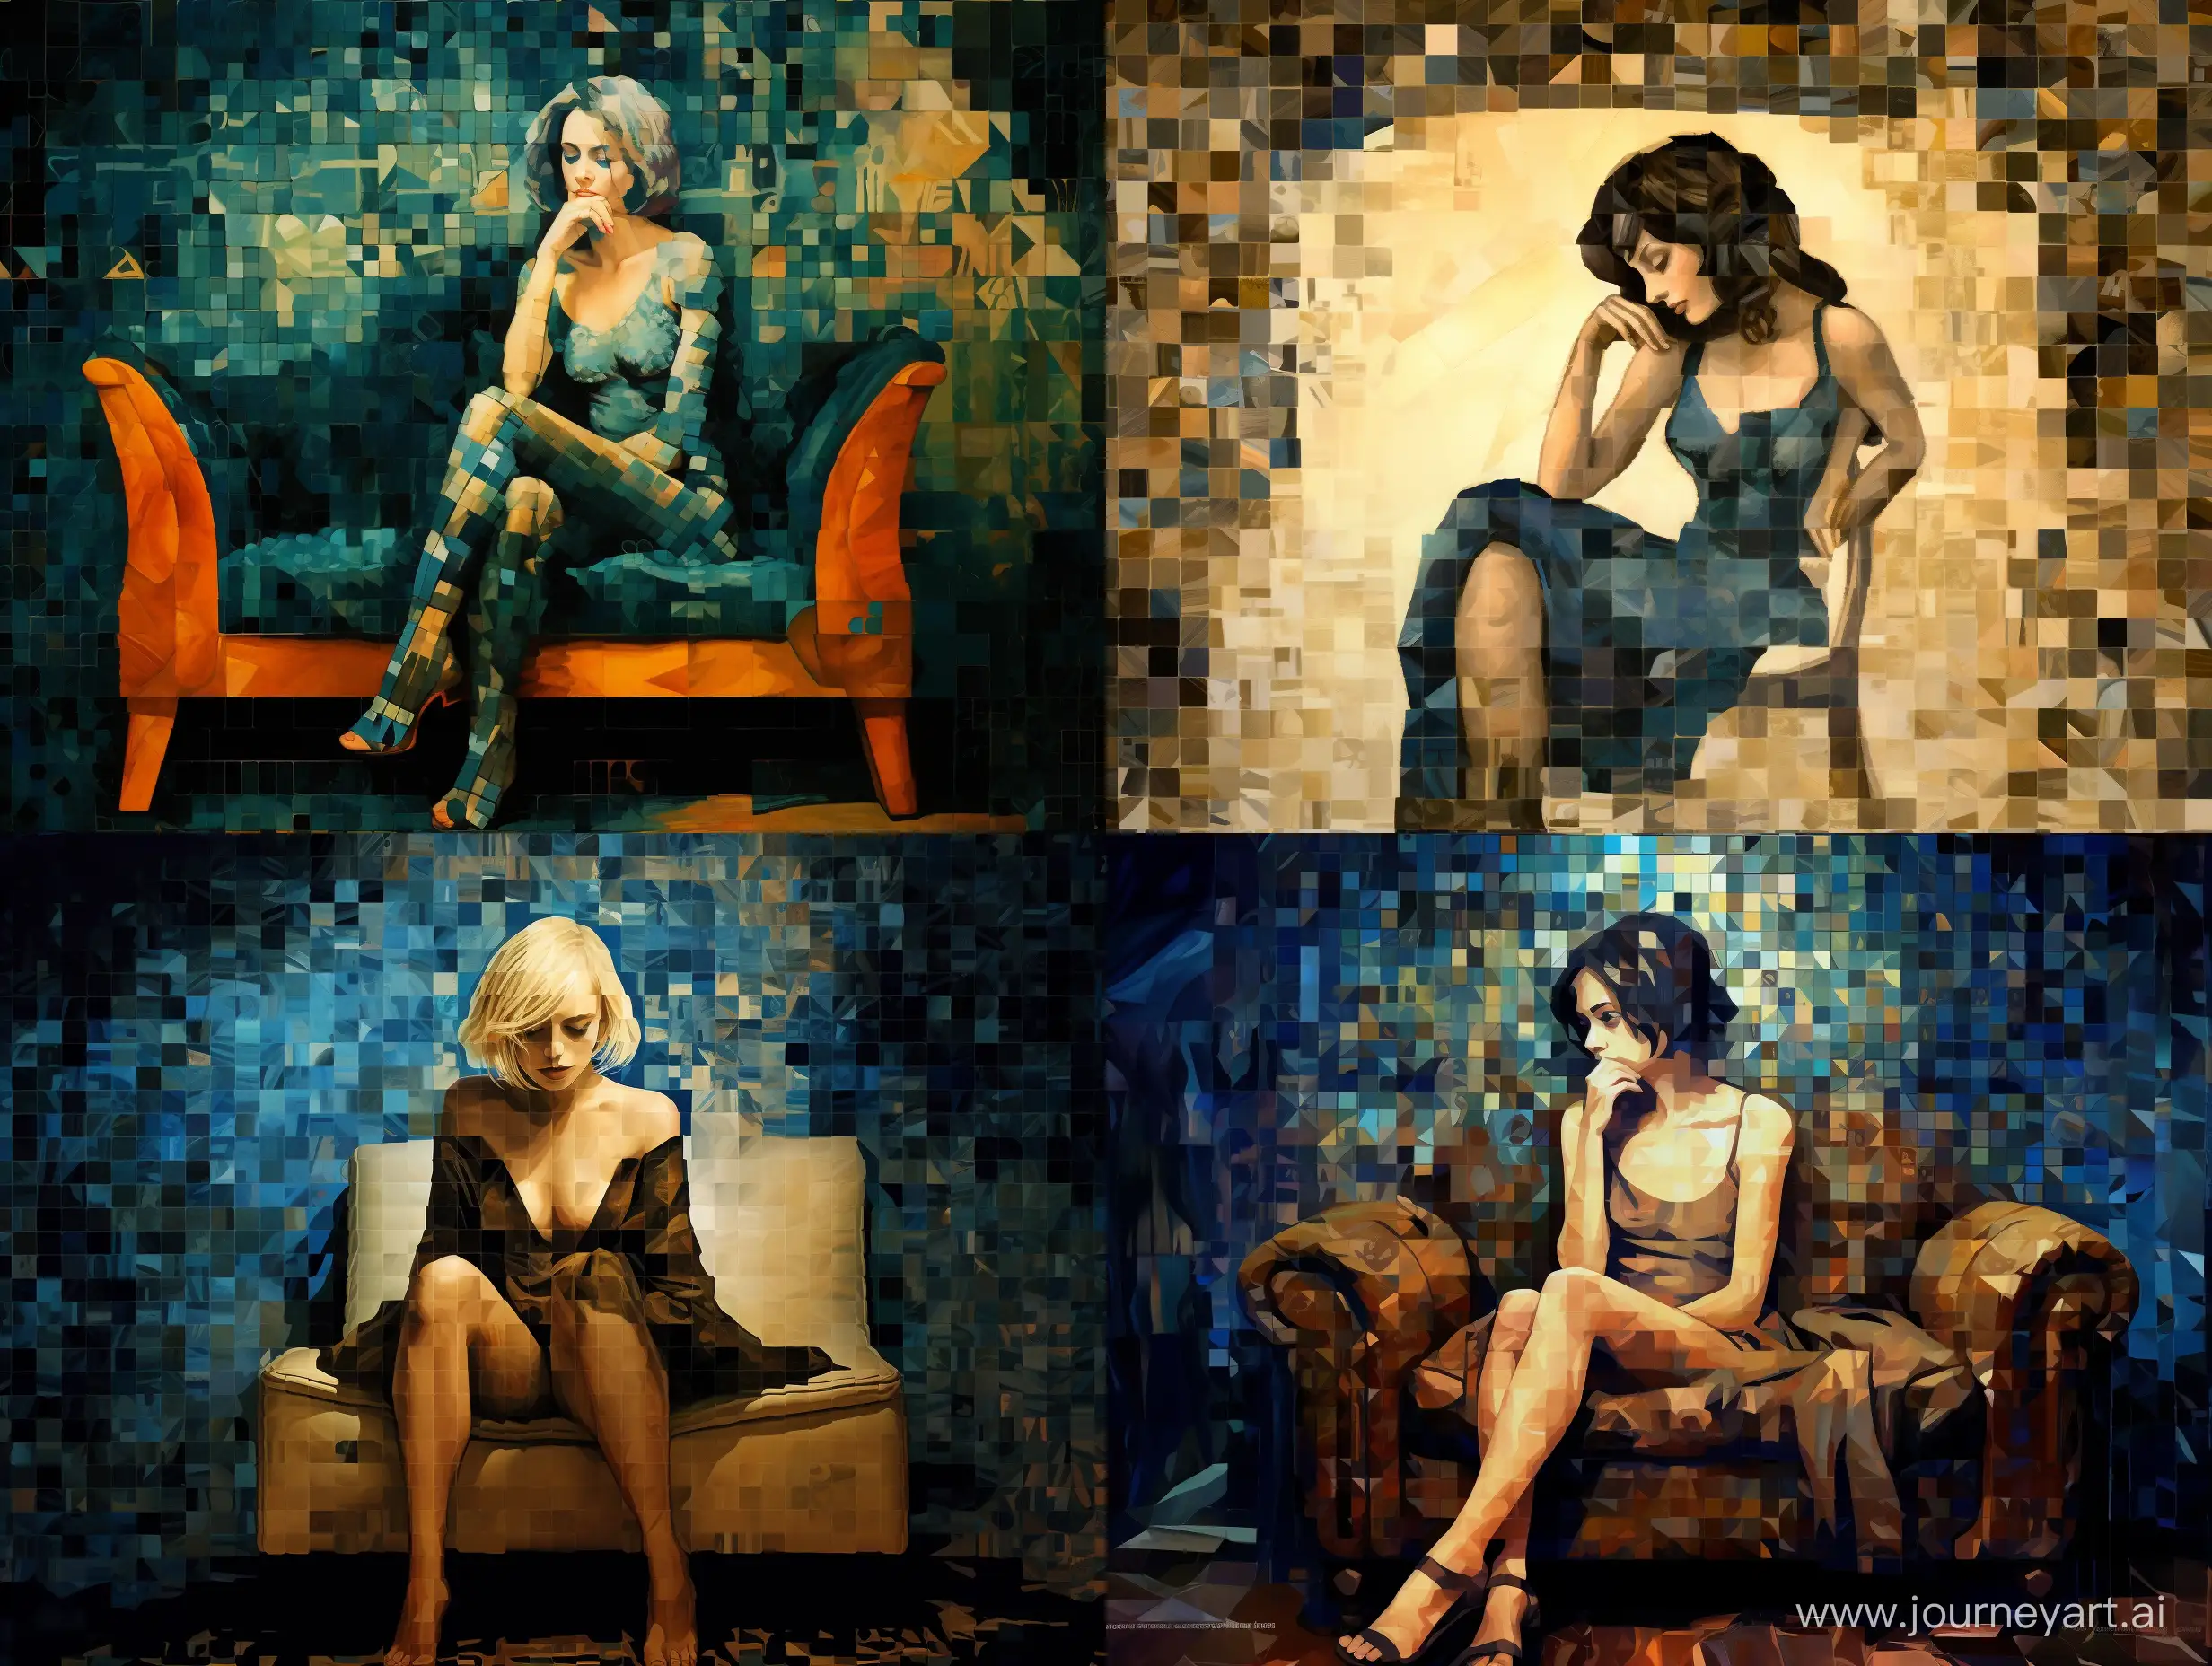 The girl is sitting on a leather armchair against a background of a mosaic of beige and blue shades.  The chair is located on the right side of the image. The left side of the image is in total darkness. The emphasis on the image is on the mosaic. The mosaic wall takes up more than half of the image